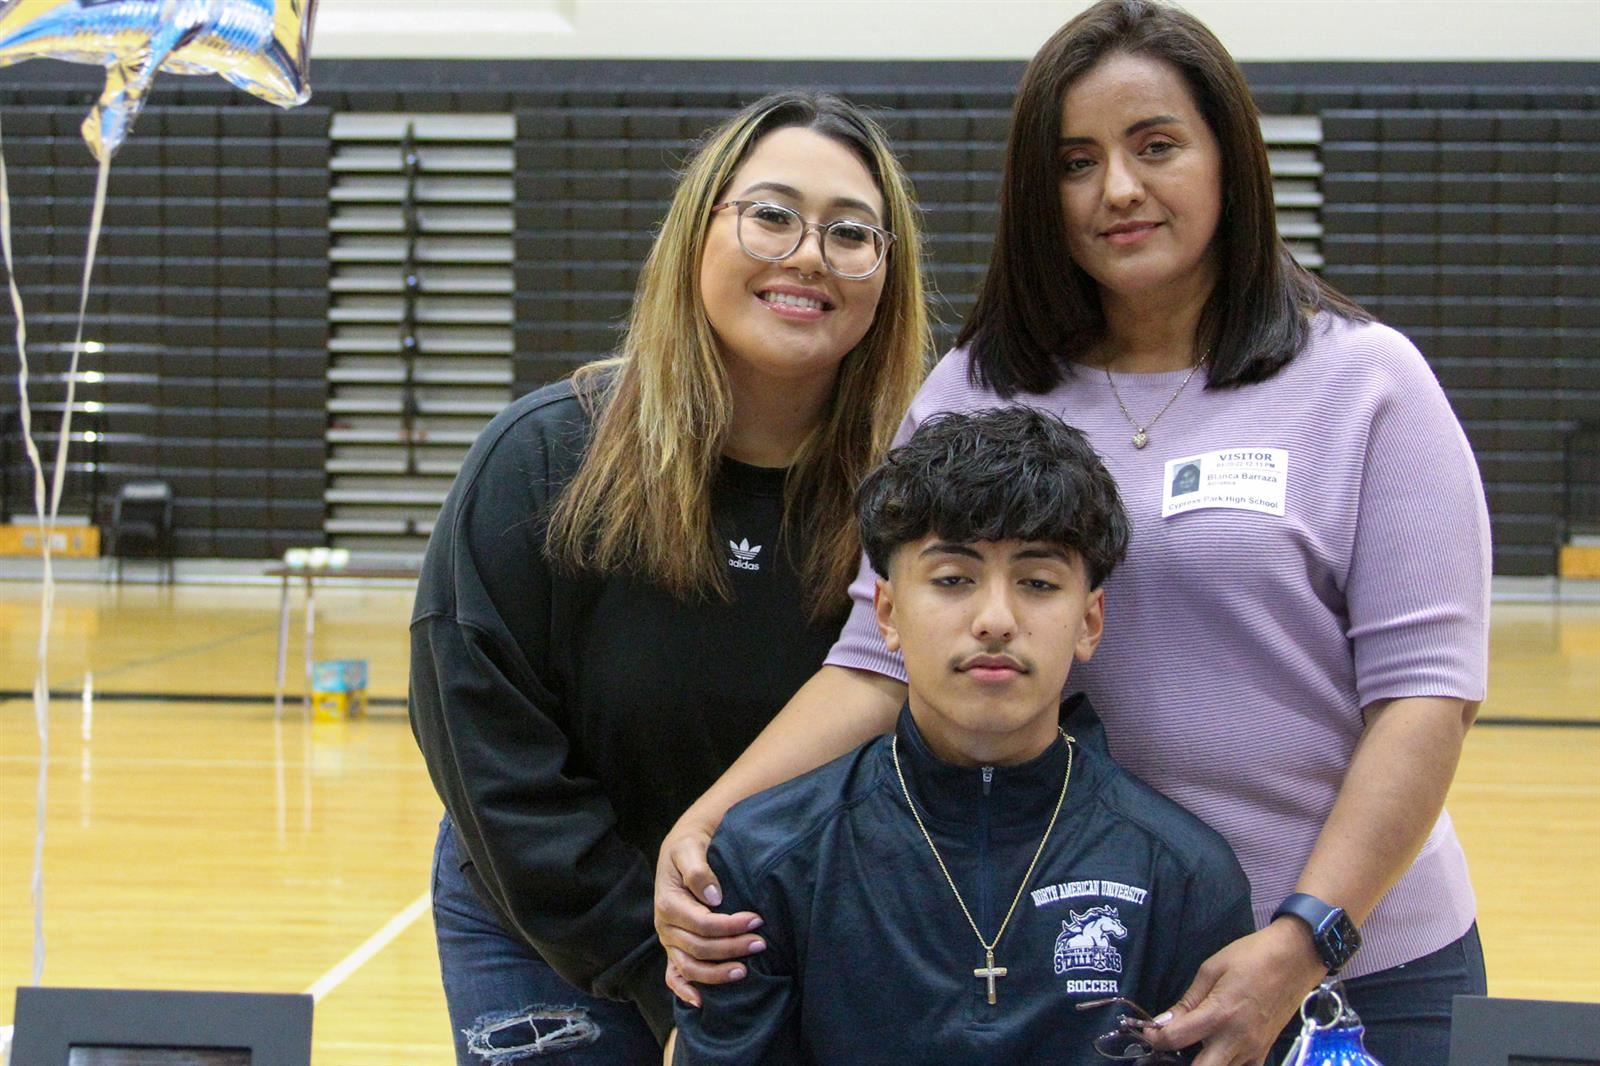 Cypress Park High School senior Andy Barraza, seated, poses with his family after signing a letter of intent to play soccer.